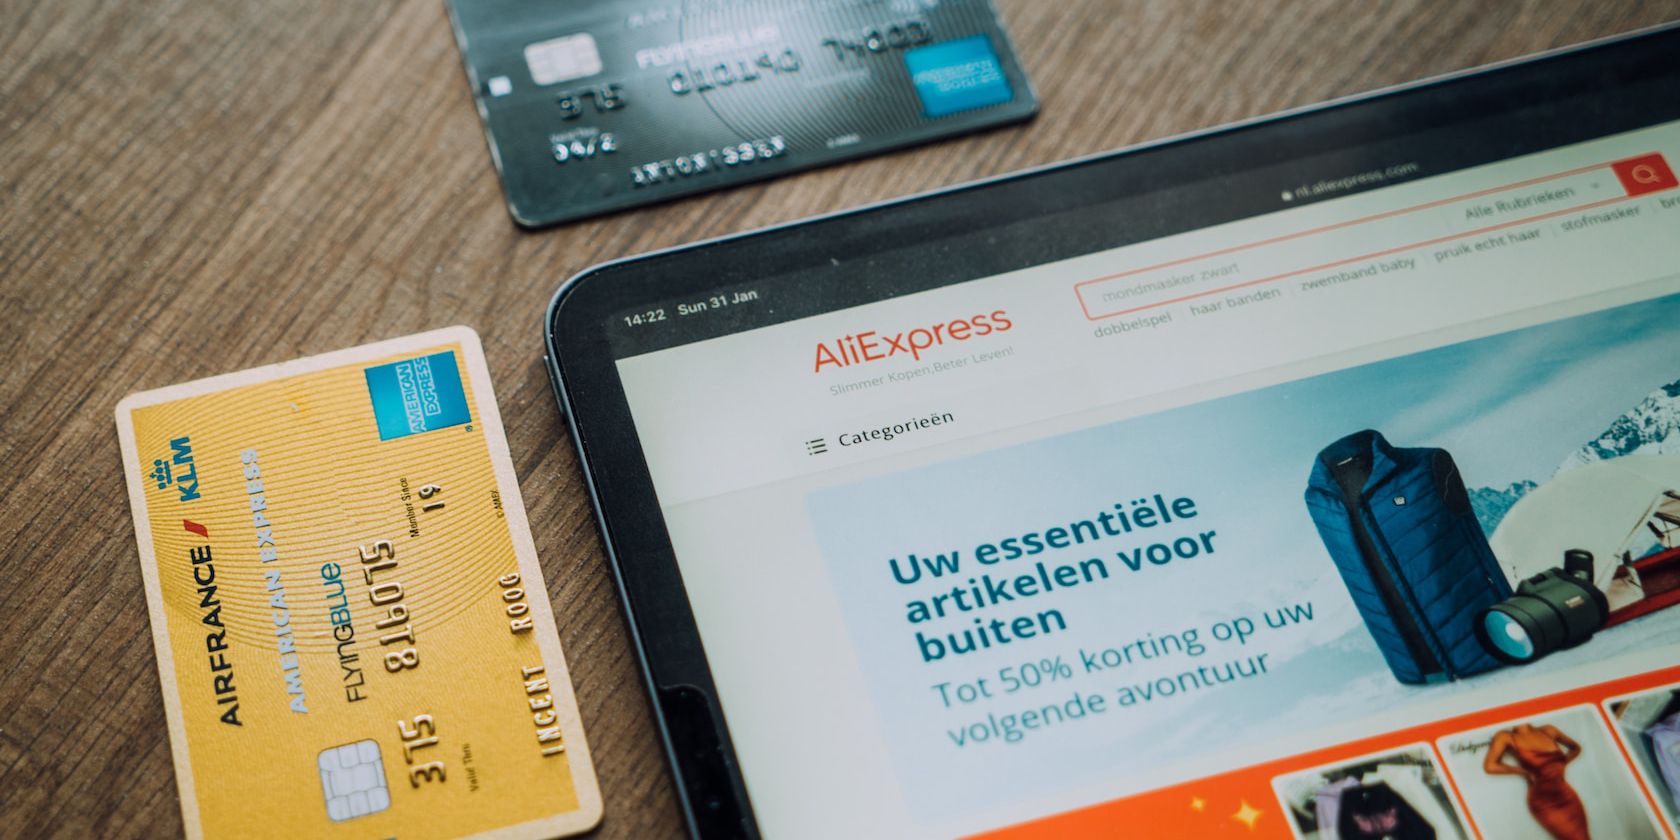 ali express website on a tablet and bank cards